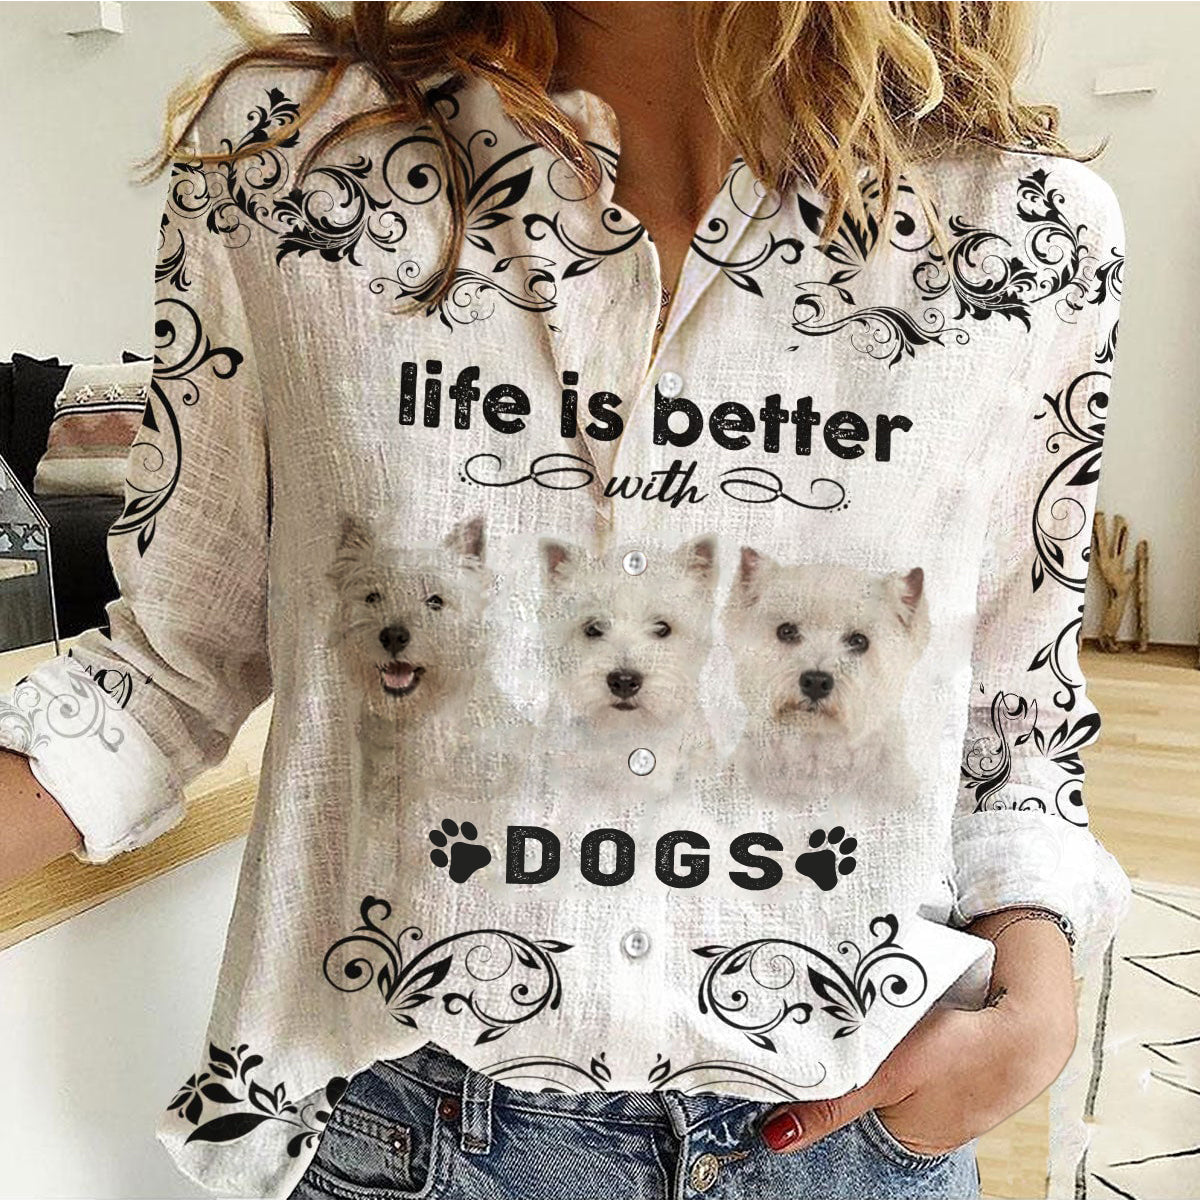 West Highland White Terrier - Life Is Better With Dogs Women's Long-Sleeve Shirt